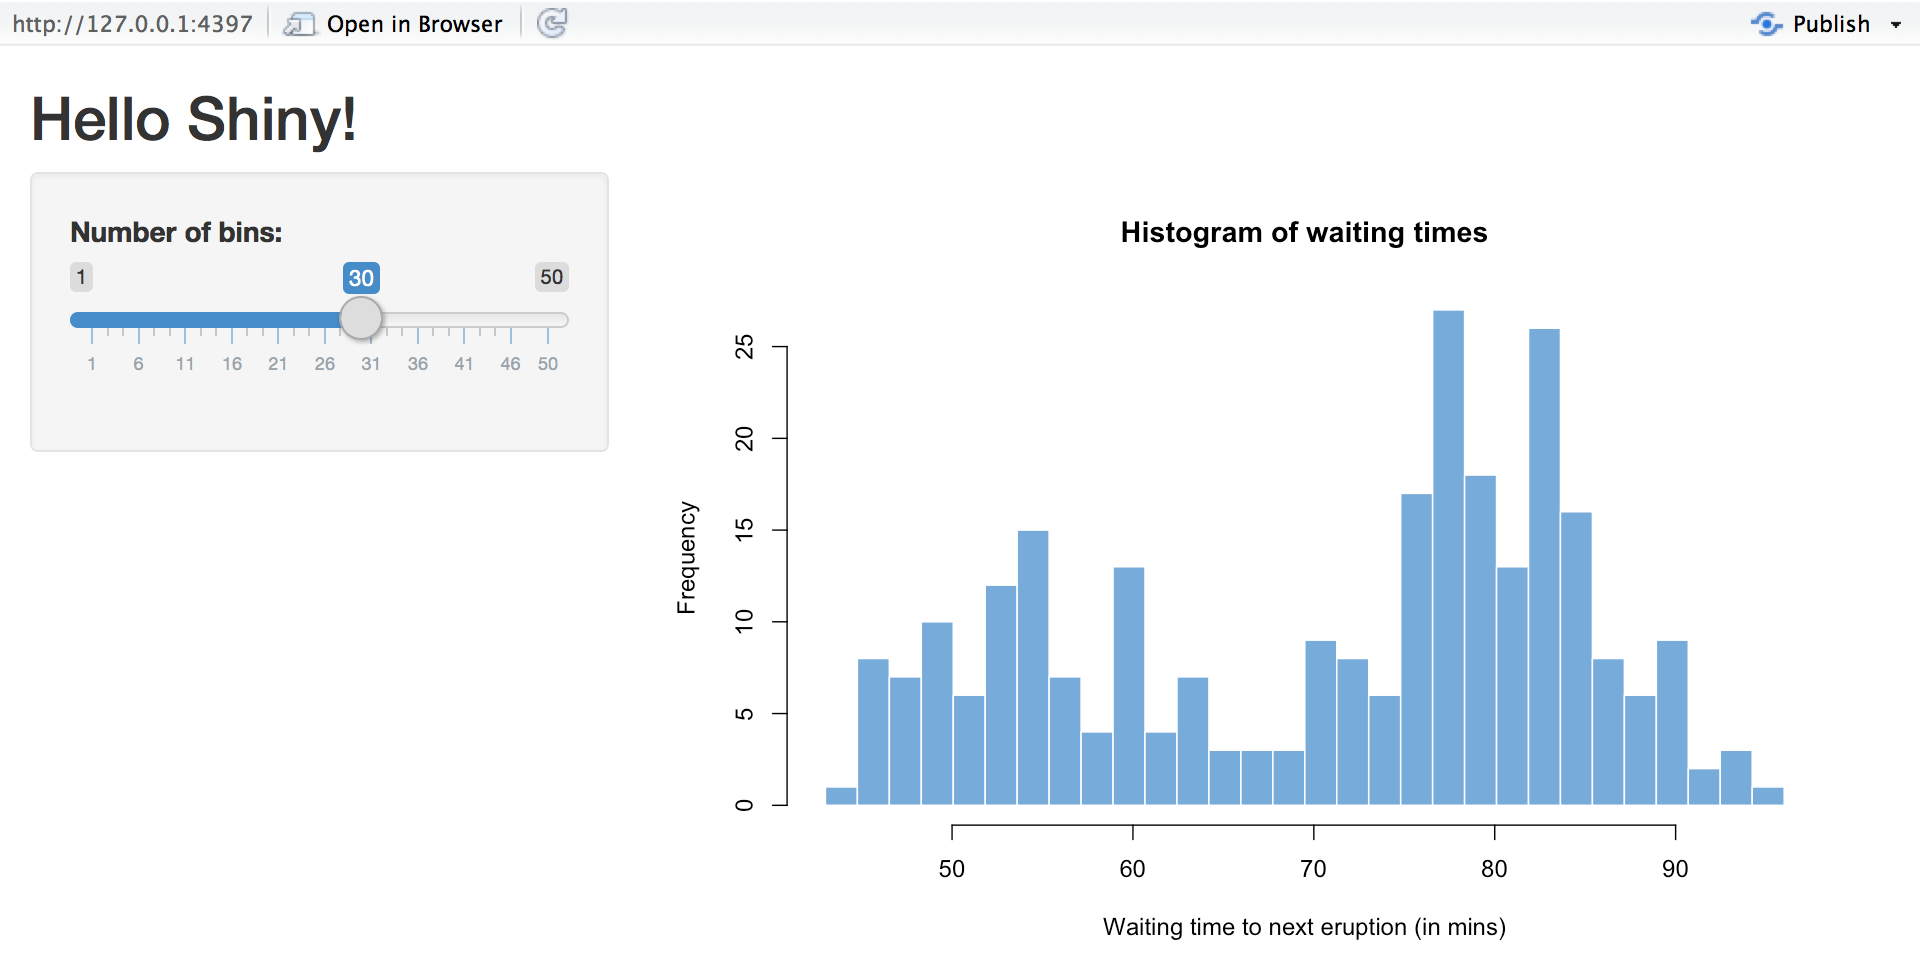 Hello Shiny! Shiny app with slider of Number of bins on the left and histogram of waiting times on the right.